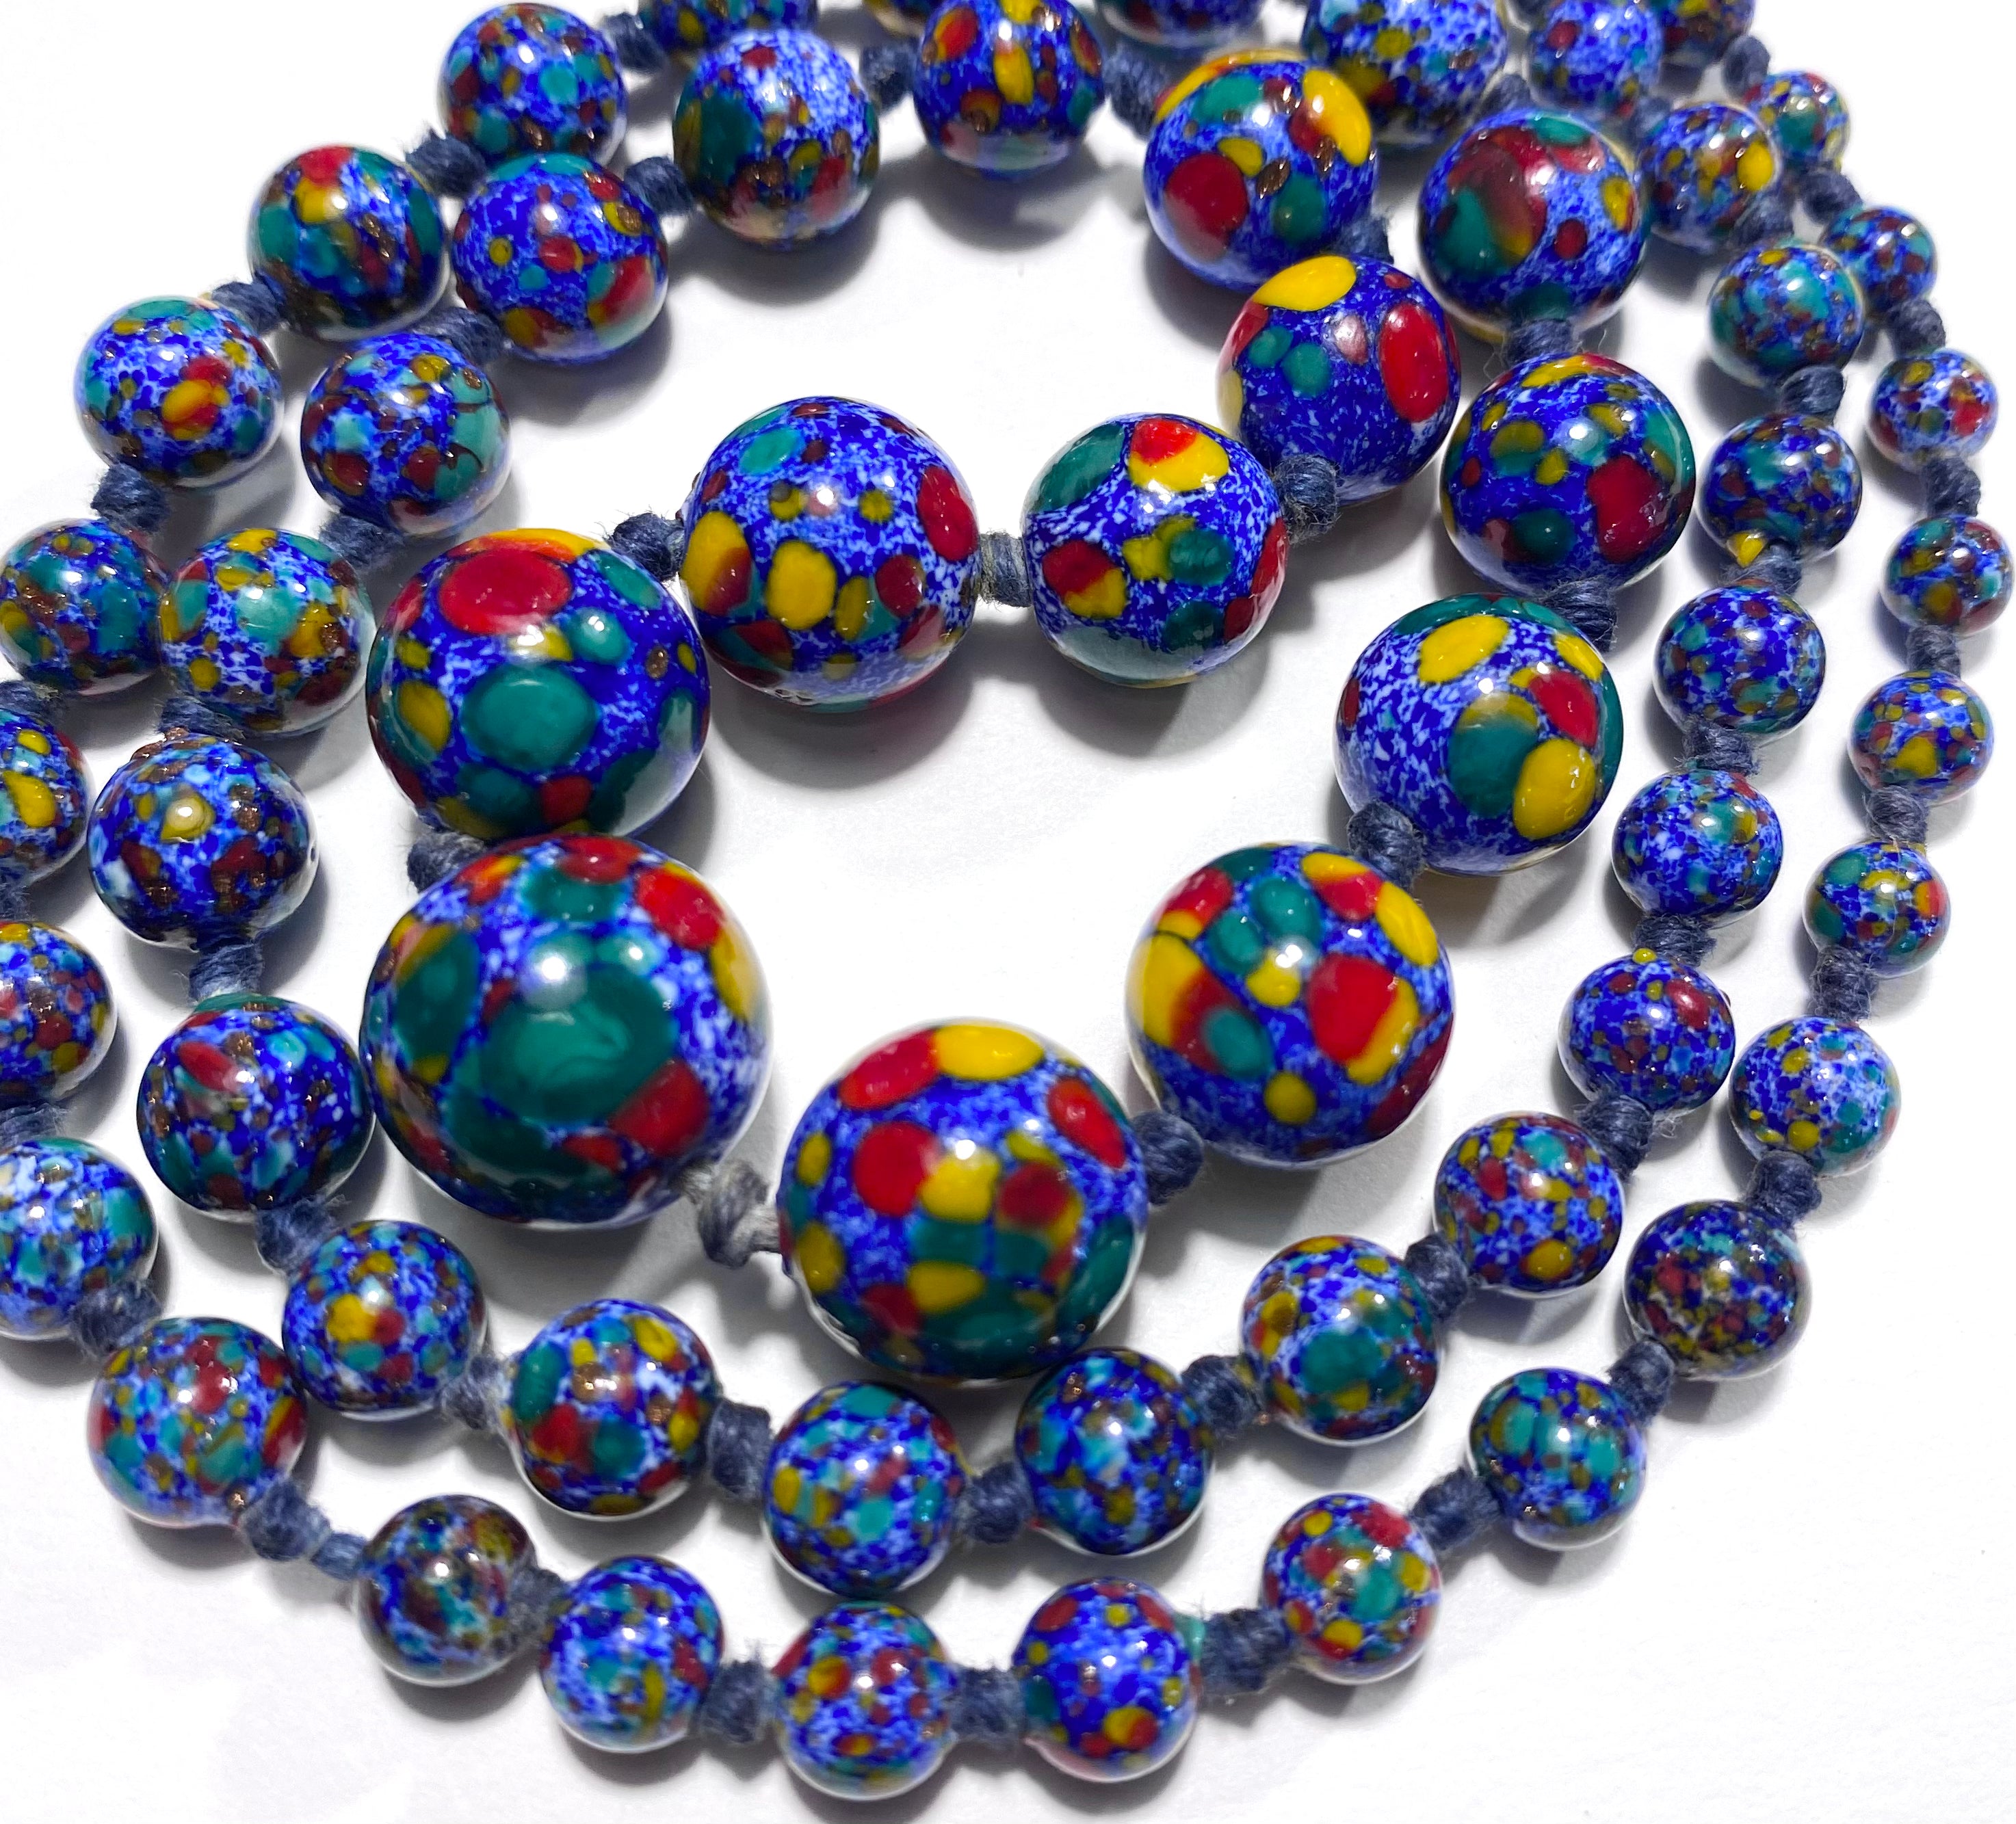 A Fine Strand of Estate Italian End-of-Day Murano Glass Beads